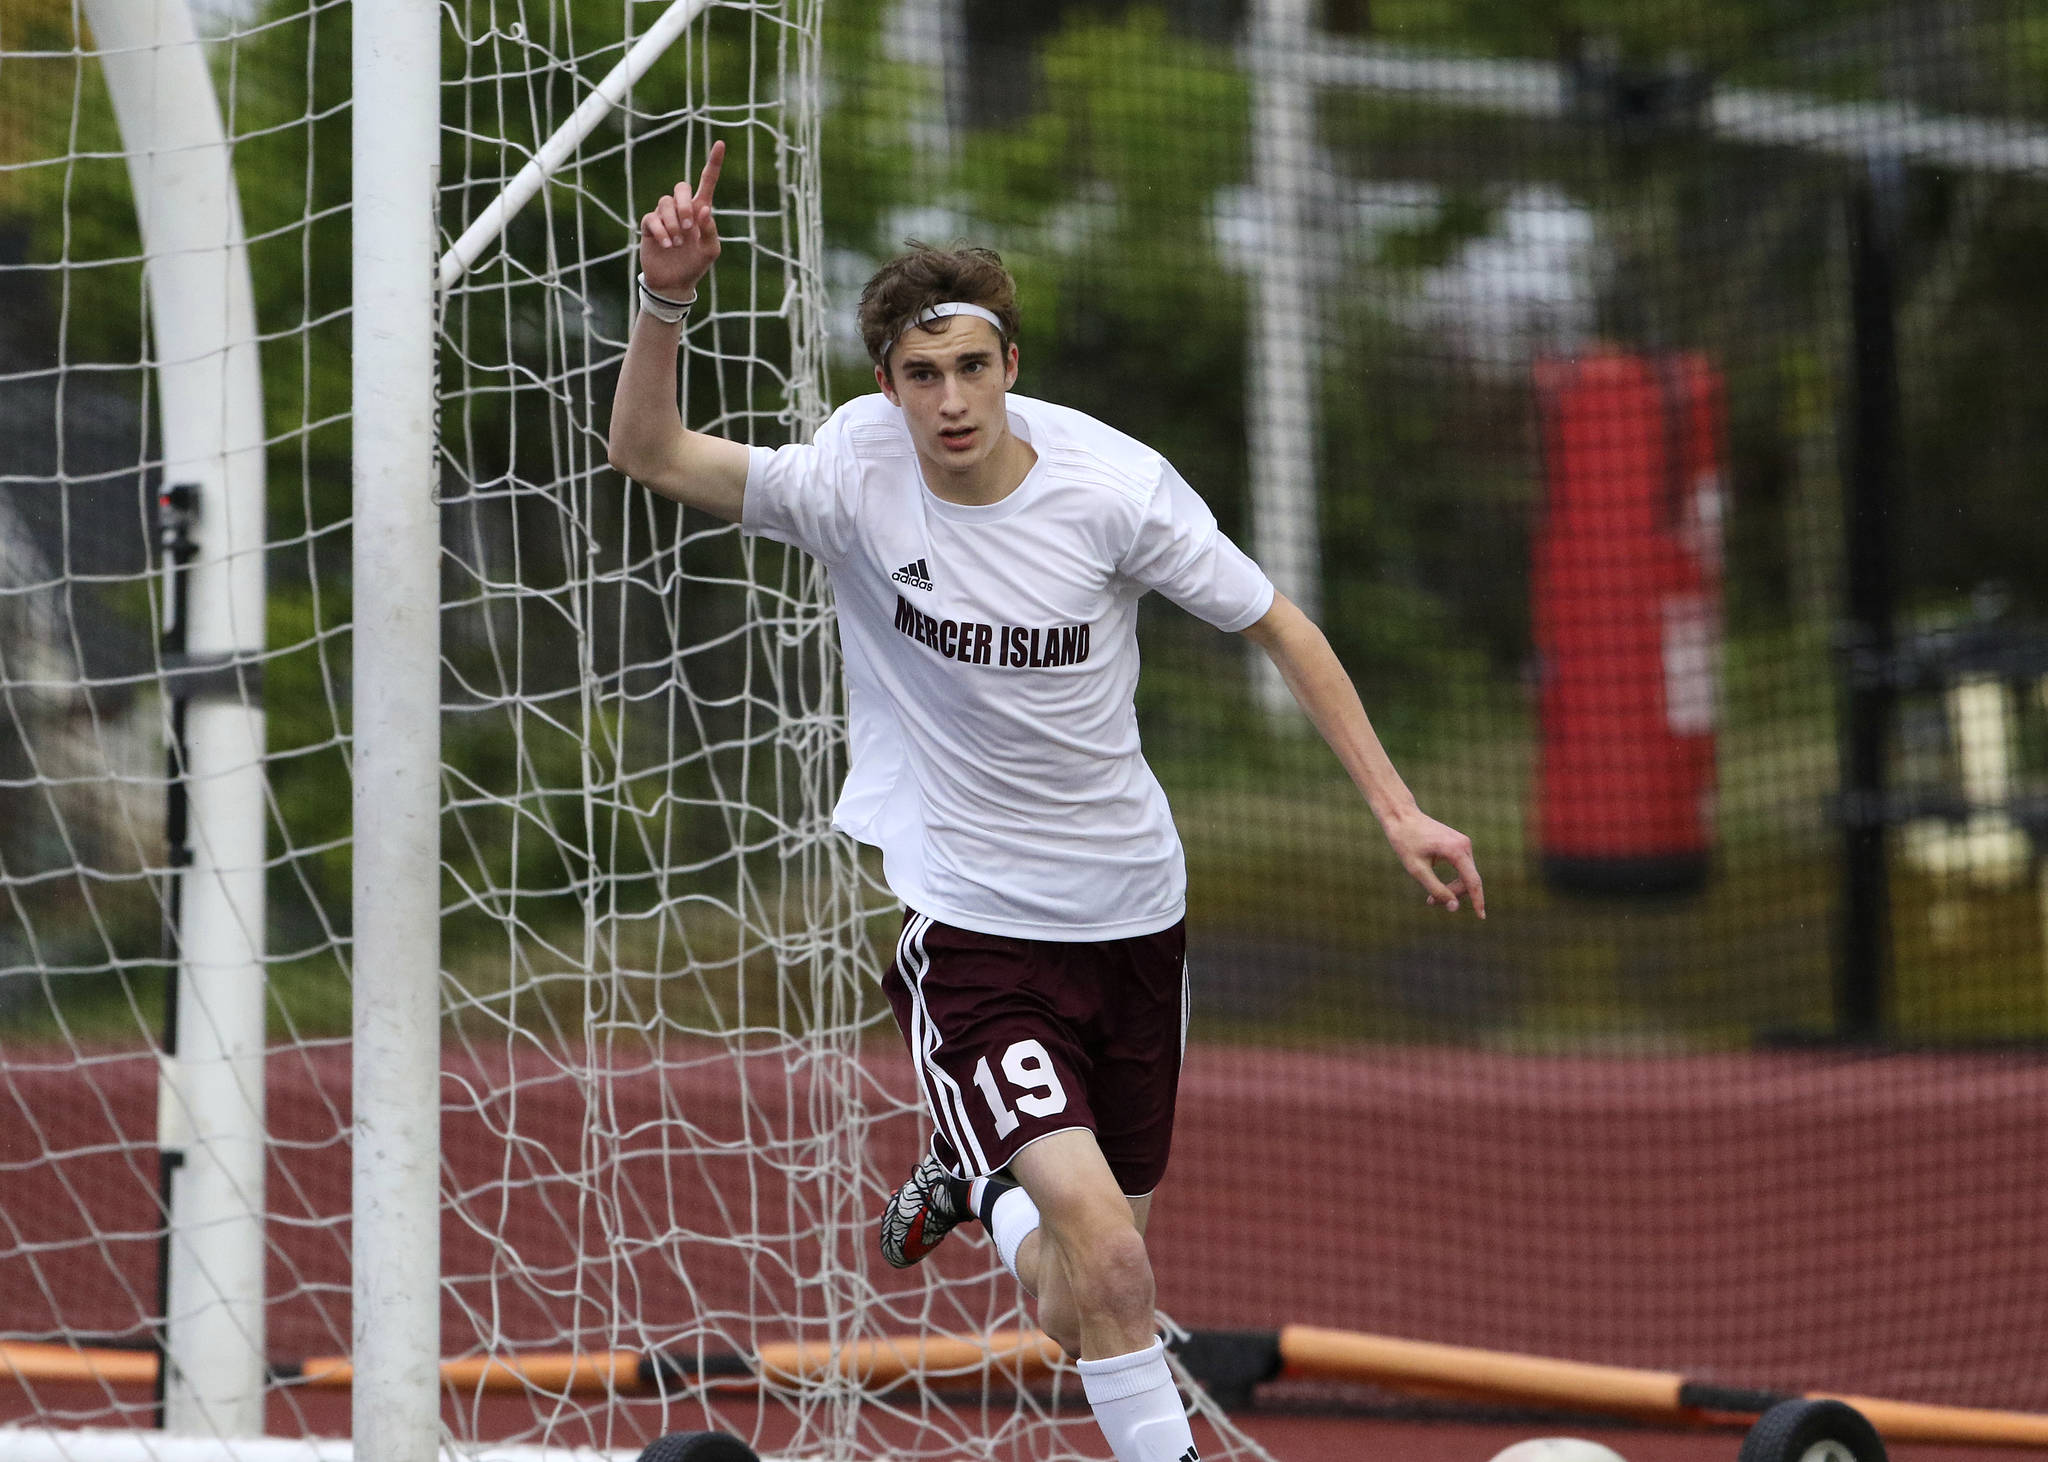 Photo courtesy of Jim Nicholson                                Mercer Island Islanders senior forward Lucas Meek celebrates after scoring a goal in the first half of play. Mercer Island defeated Shorecrest 5-0 in the first round of the Class 3A state playoffs on May 16.